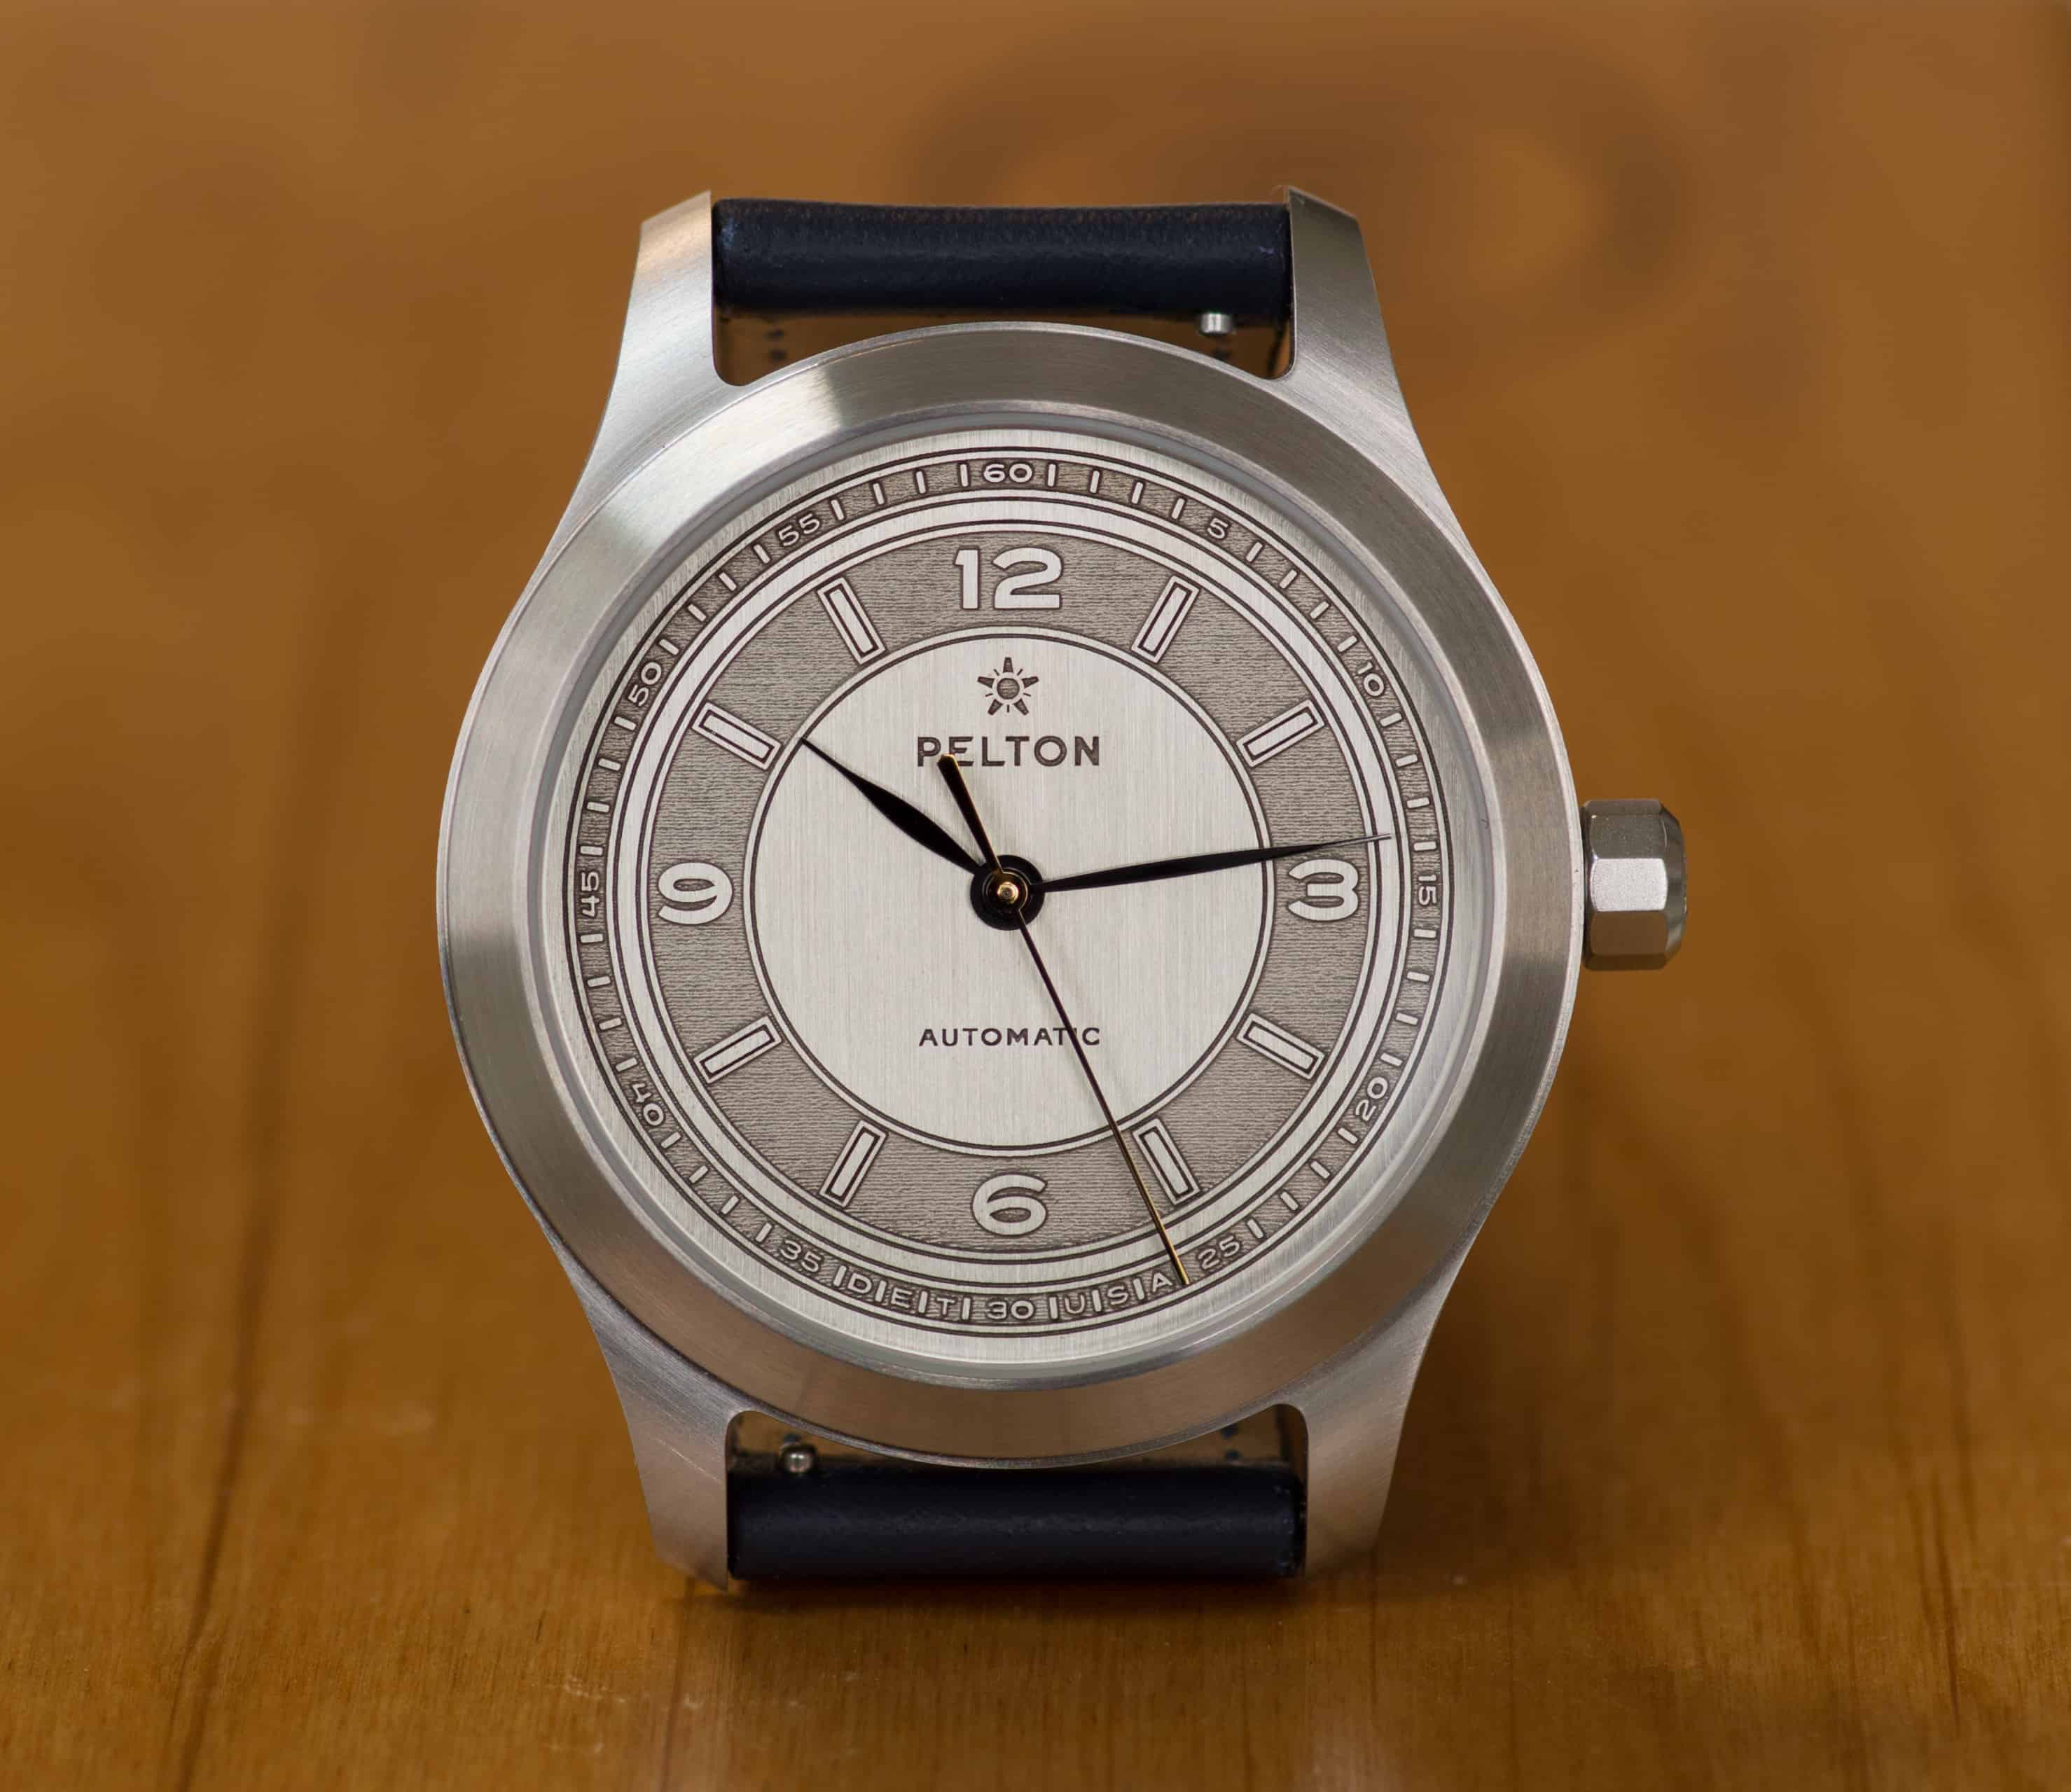 Introducing the Pelton Sector Nickel Silver LE, with an American-Made Case and Dial